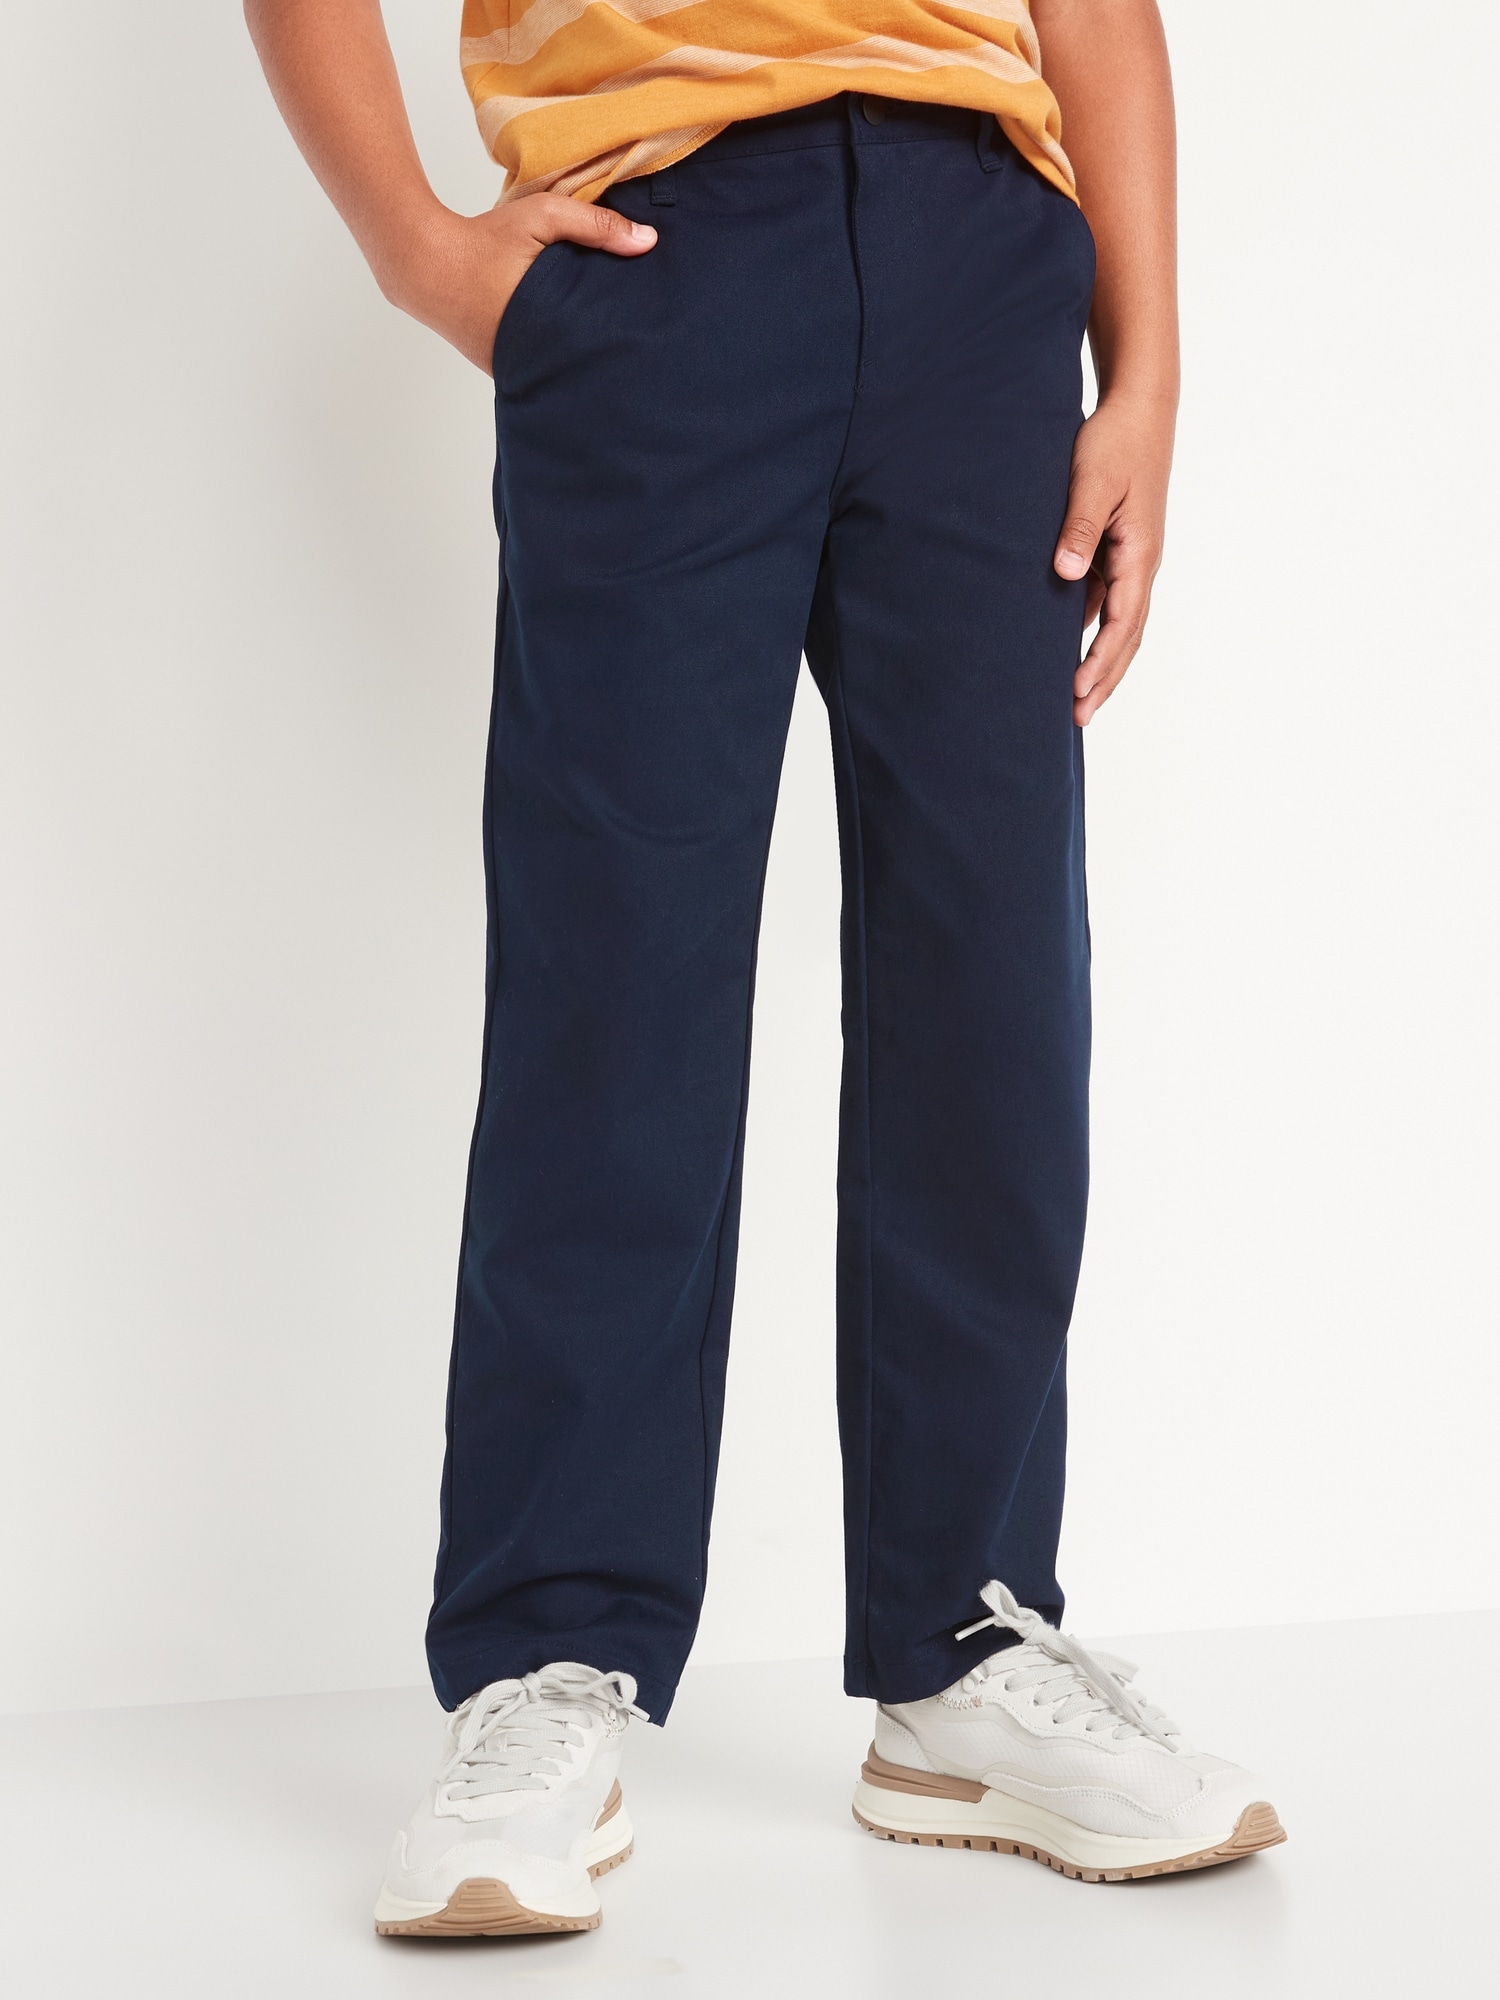 Breathe On Tapered Pants For Boys  Old Navy